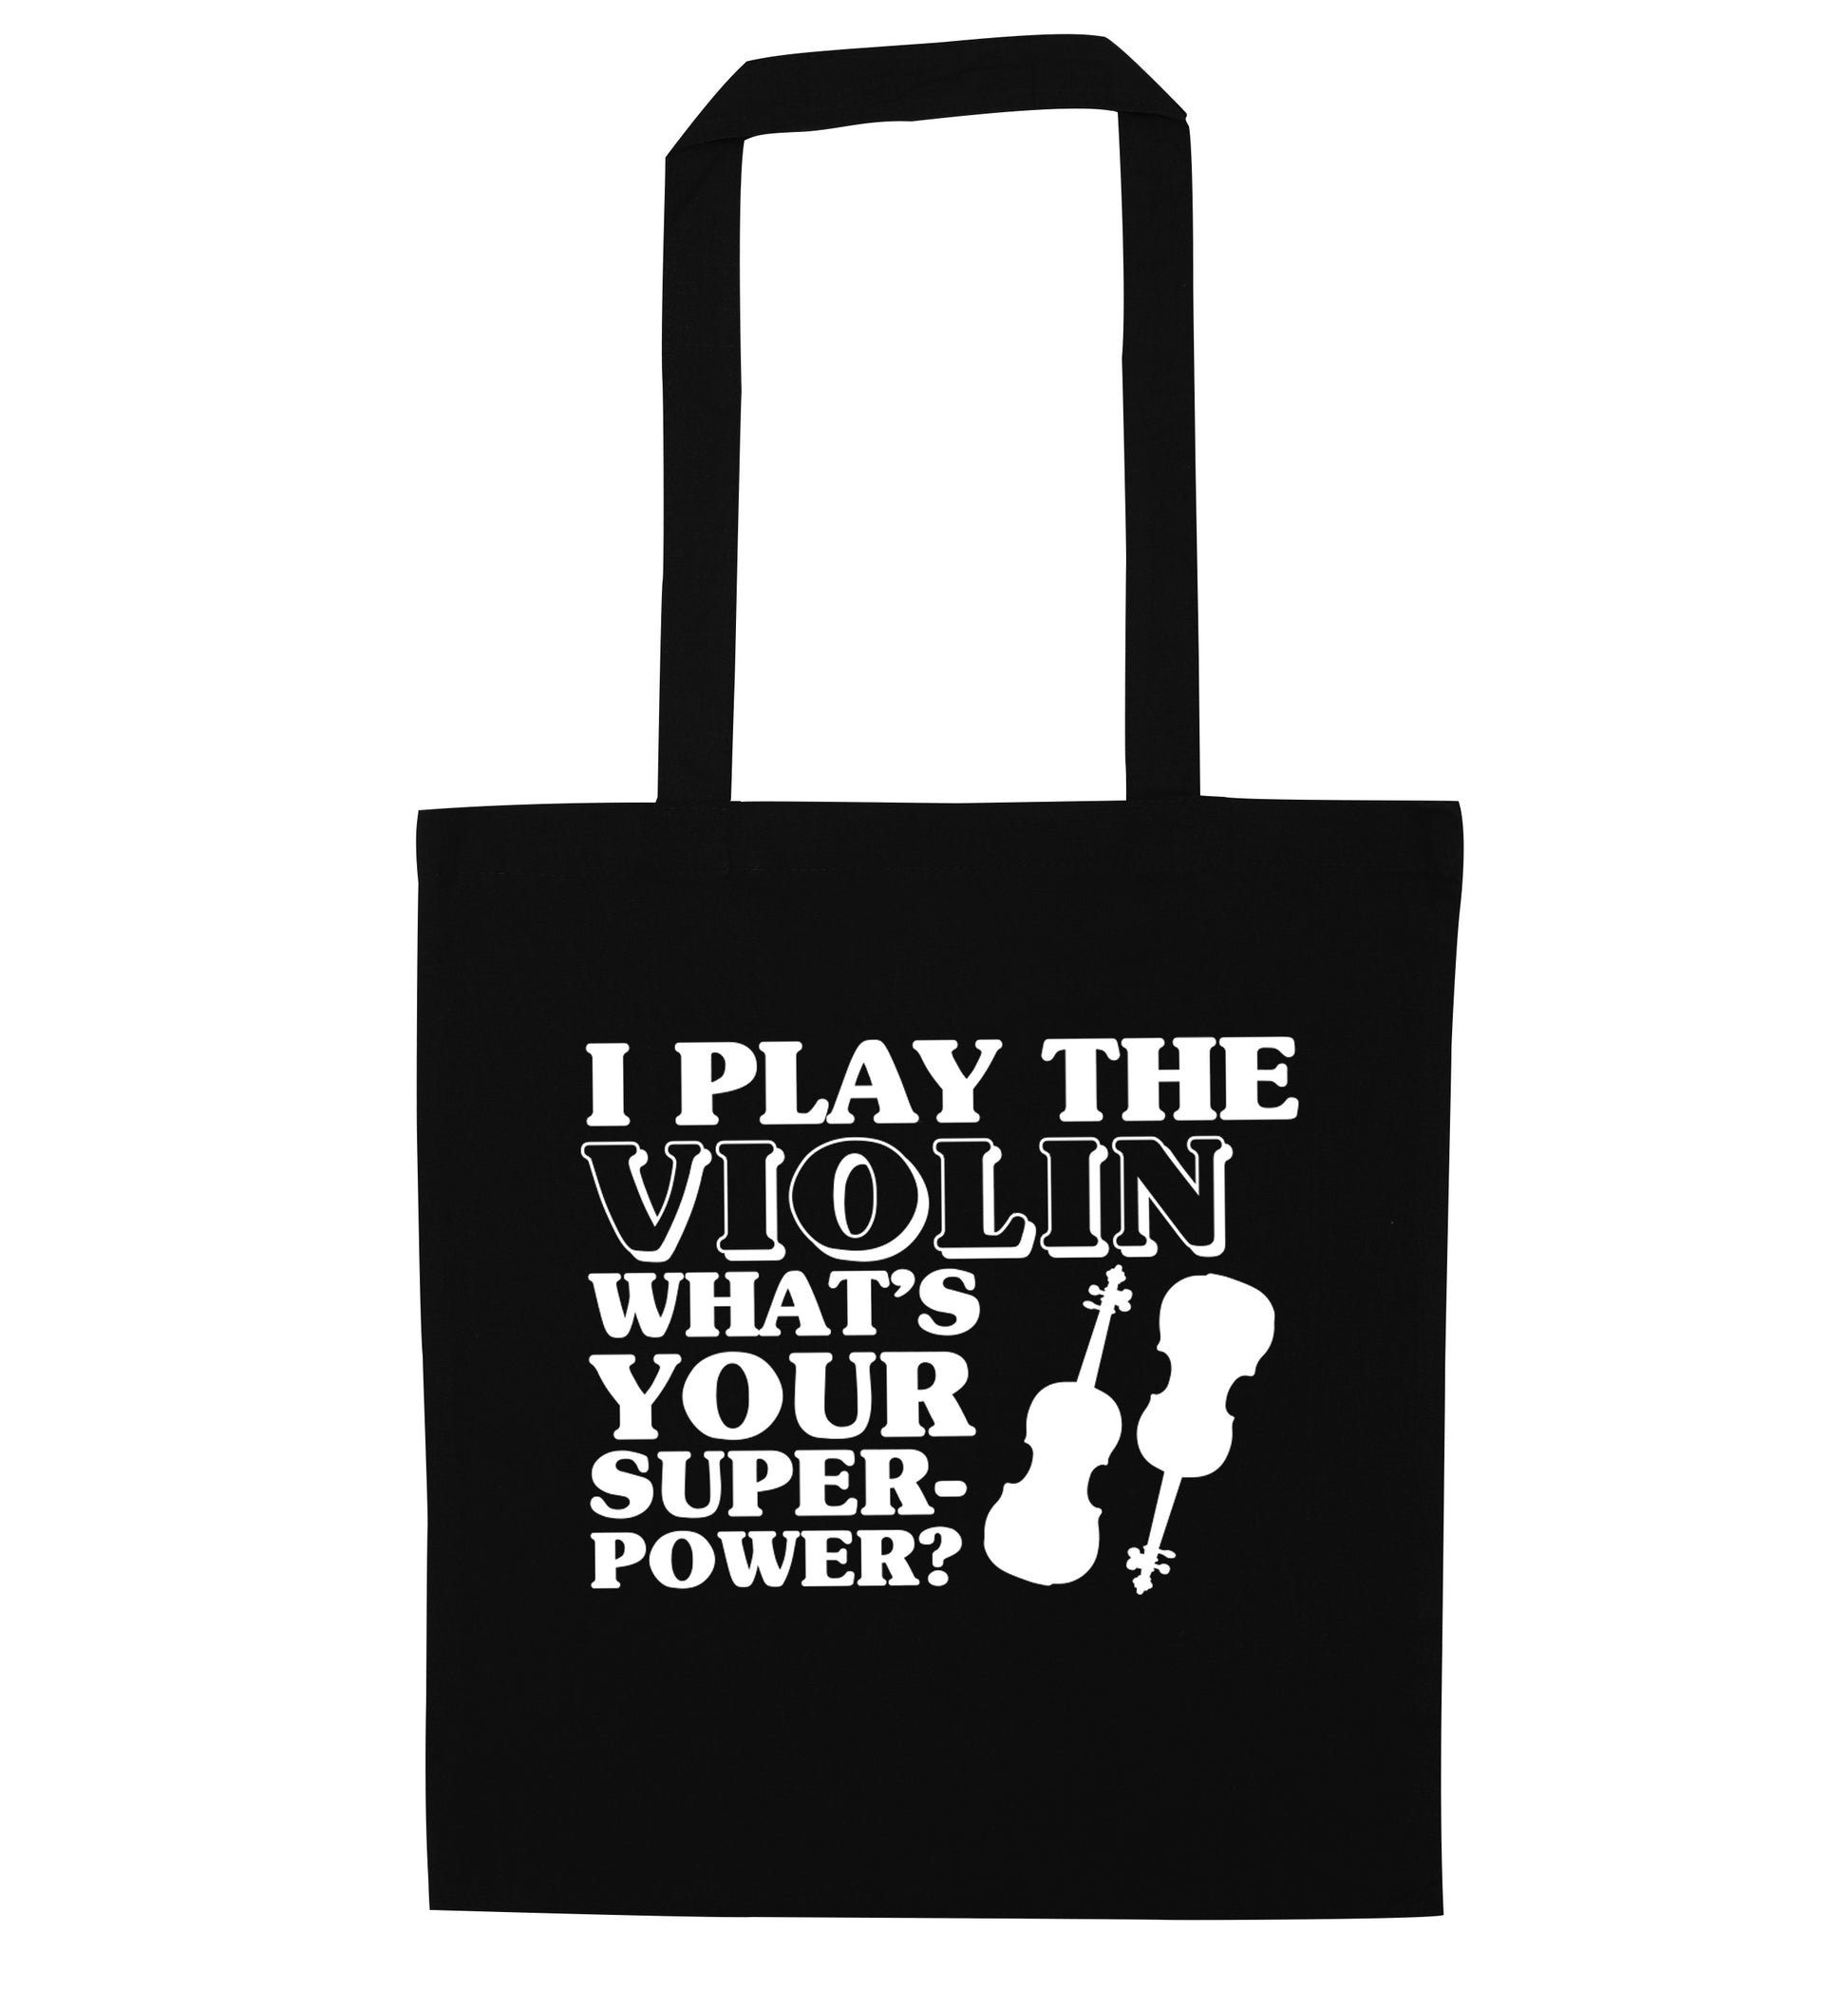 I Play Violin What's Your Superpower? black tote bag